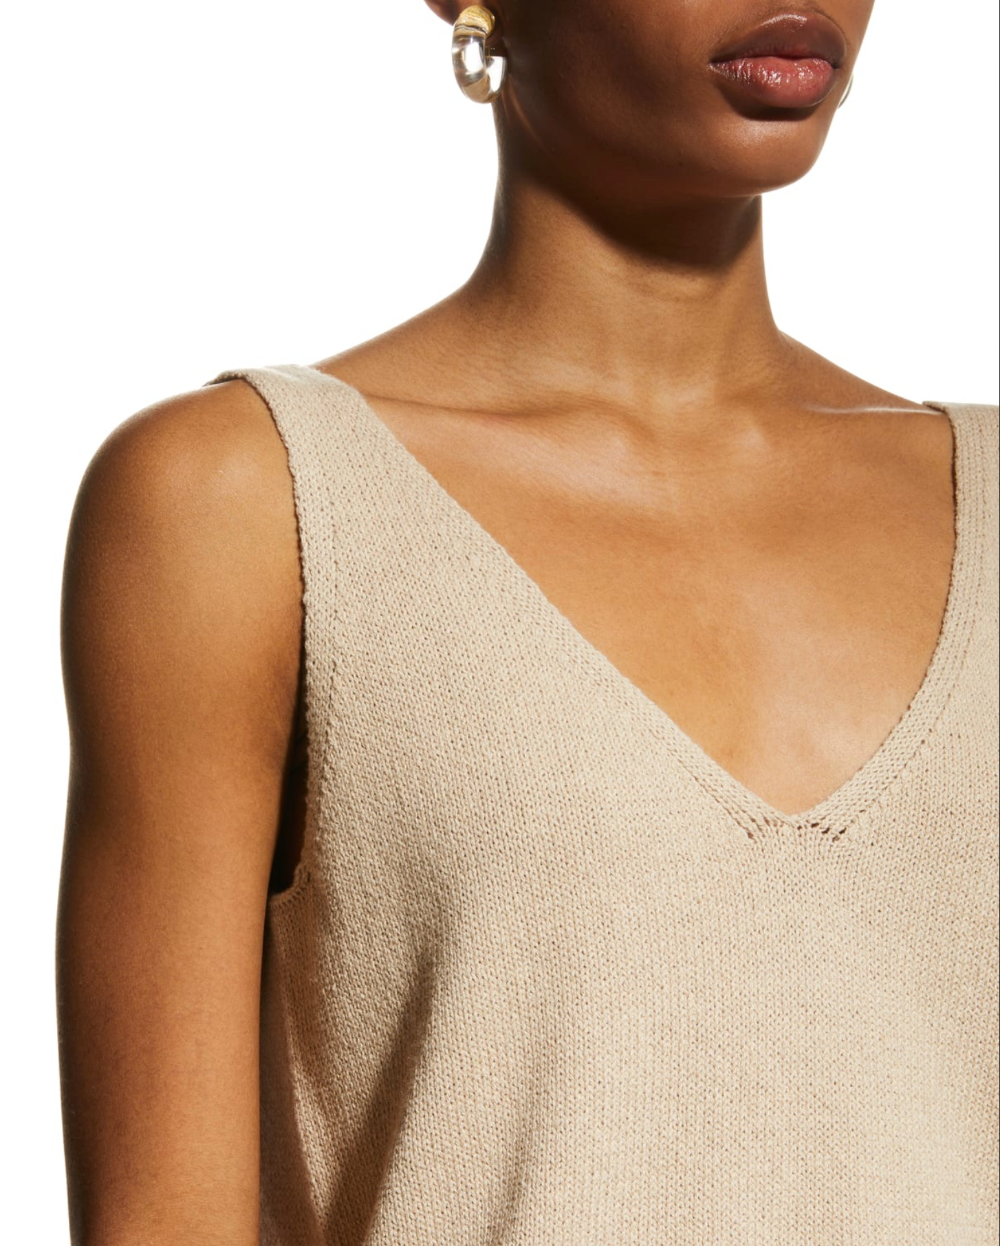 The chic Maise V-neck top from Rails is a knitted version of the classic tank top. Effortless and flirty with a deep V-neck at both front and back, this top is a flattering choice that’s perfect for wearing both solo and layered. 